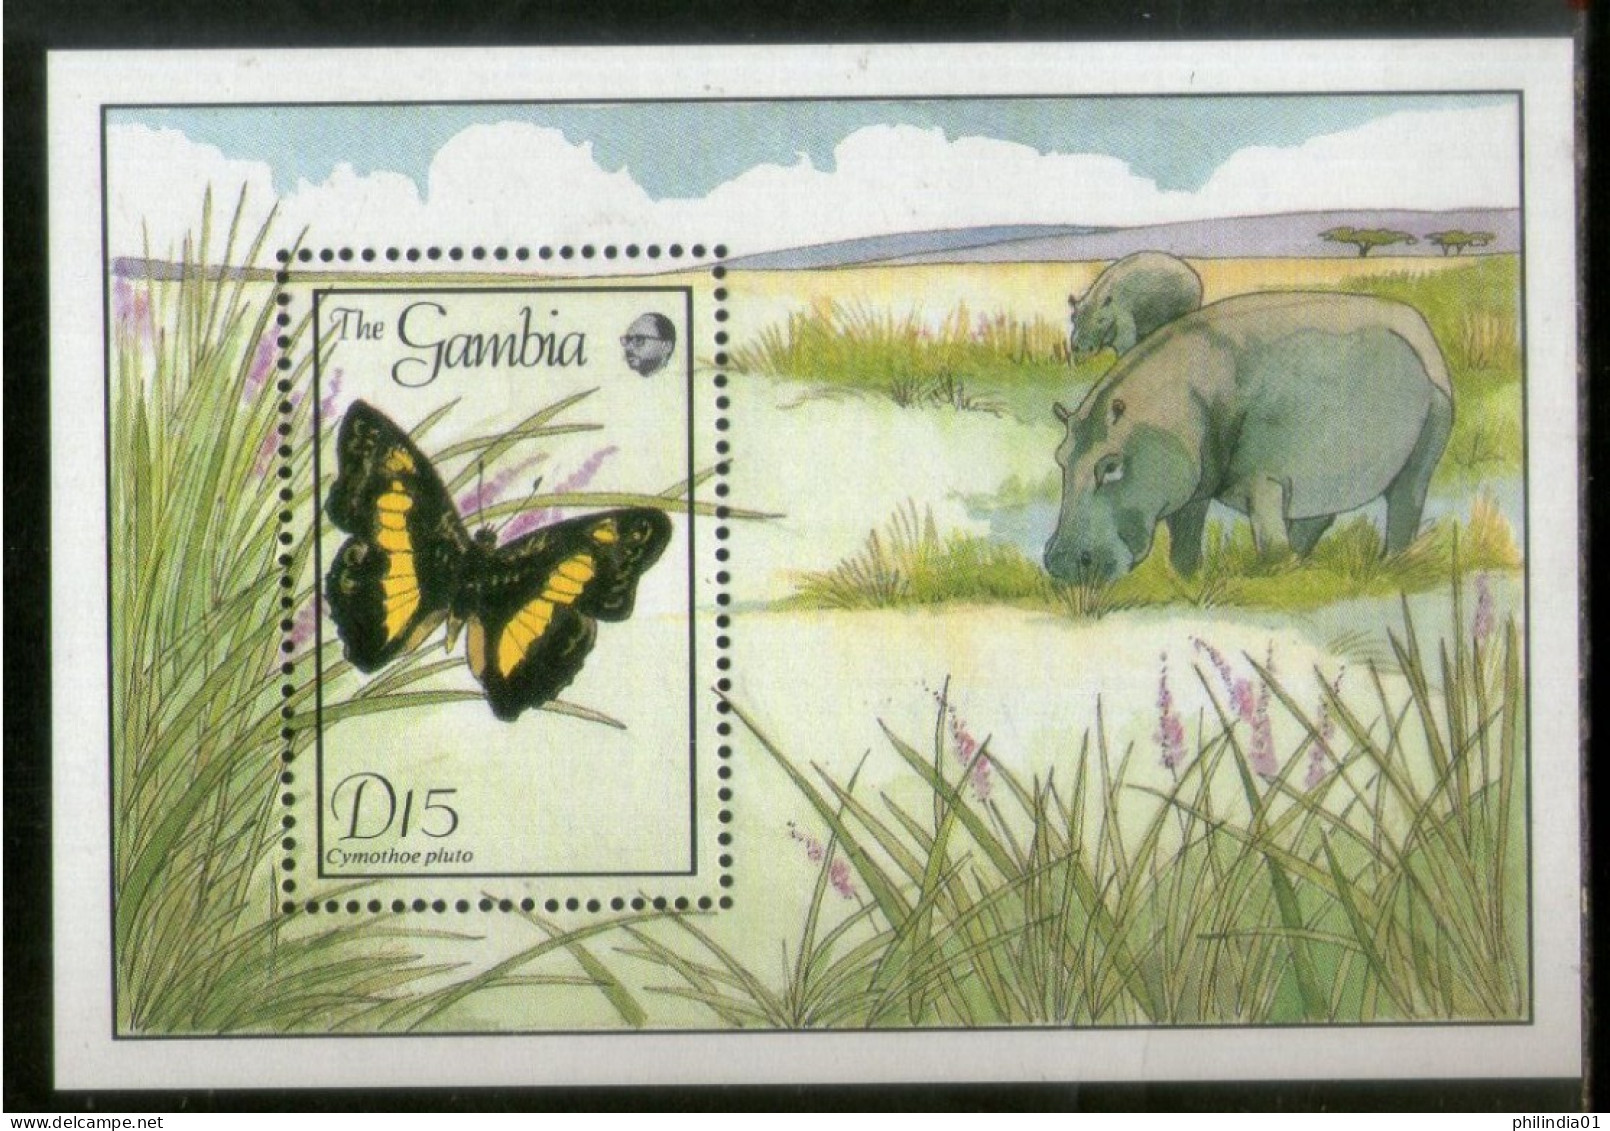 Gambia 1989 Butterflies Moth Insect Hippo Wildlife Animals Sc 845 M/s MNH # 1584 - Schmetterlinge